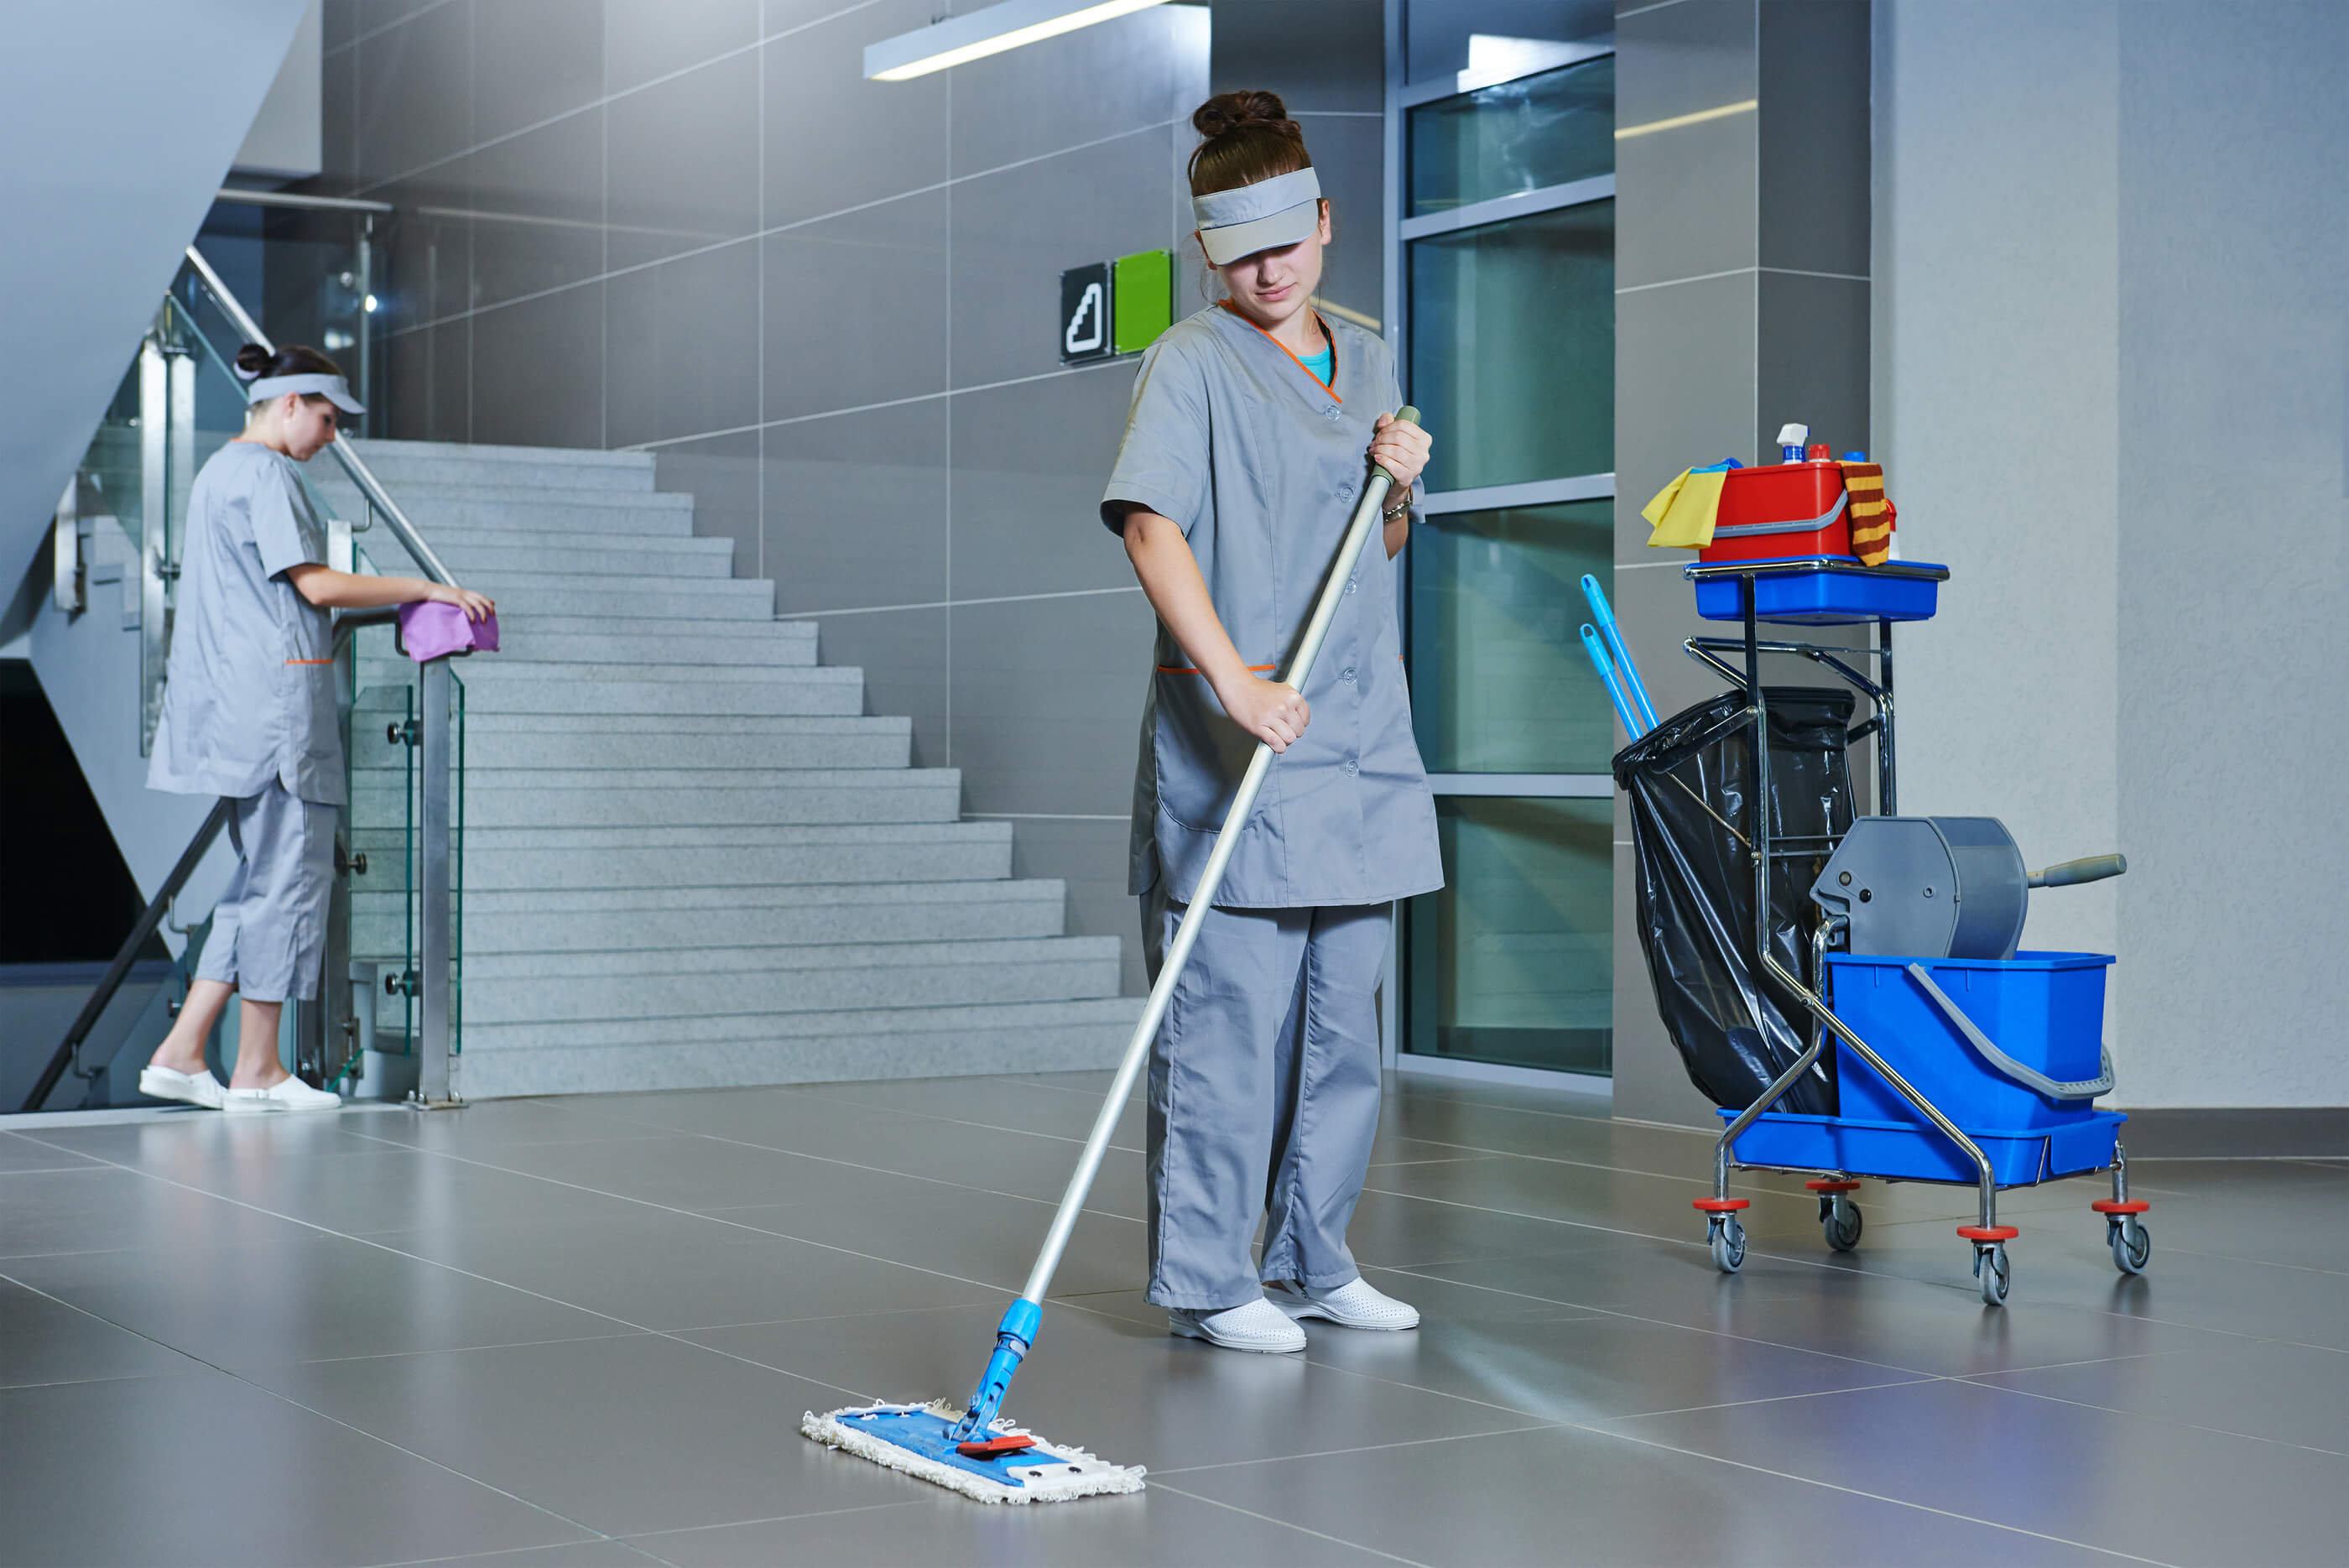 two cleaners, one of which is mopping a hard surface floor and the other is wiping the rails